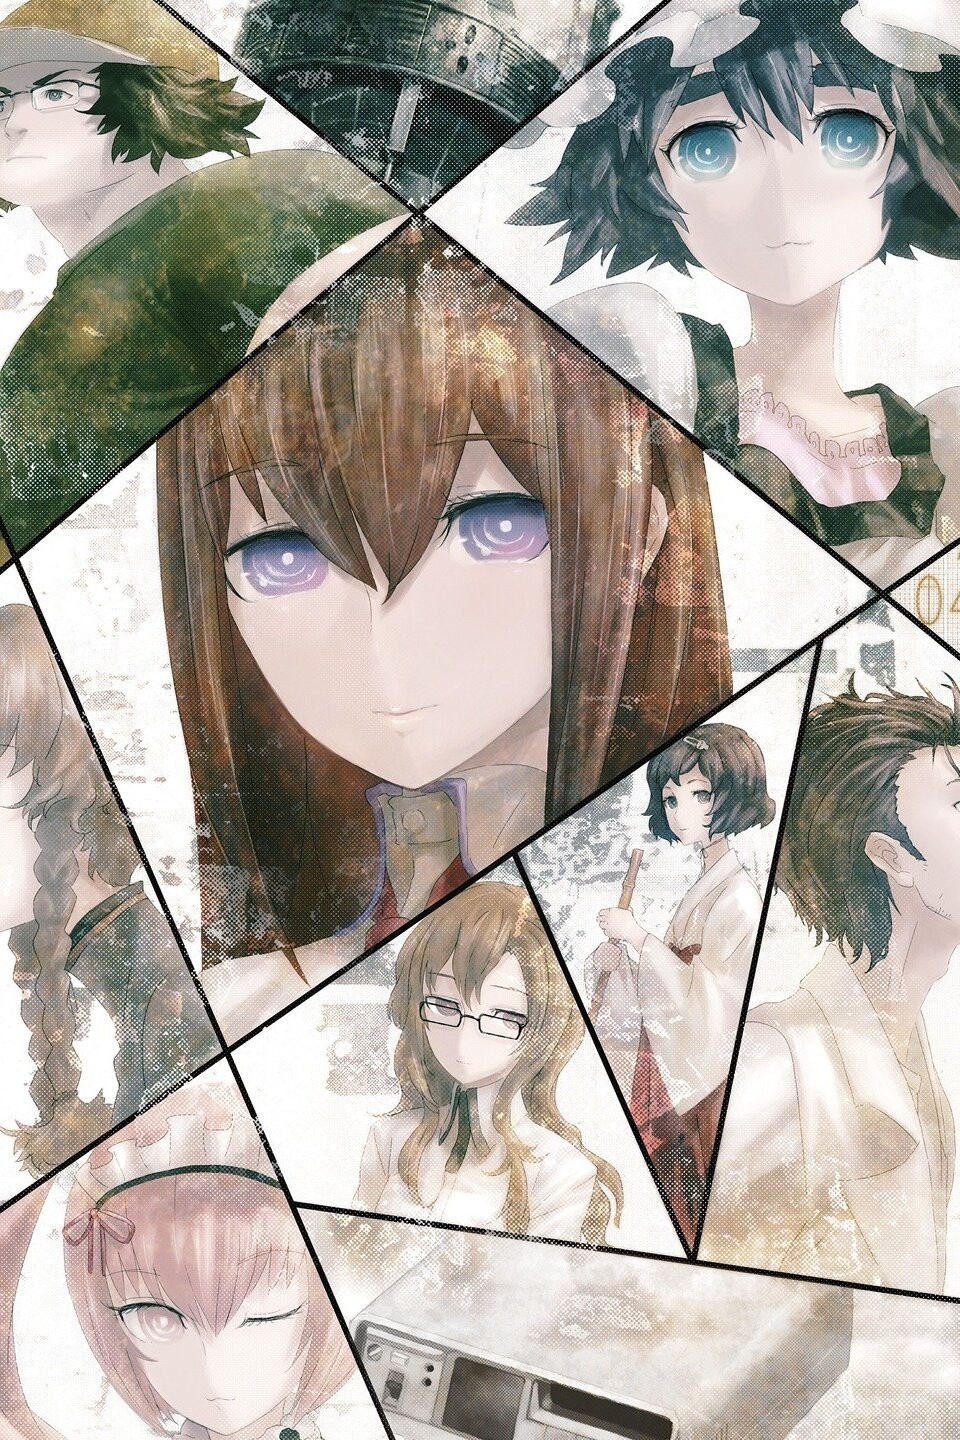 13 Best Anime Like Steins Gate That You Cannot Miss This Year!